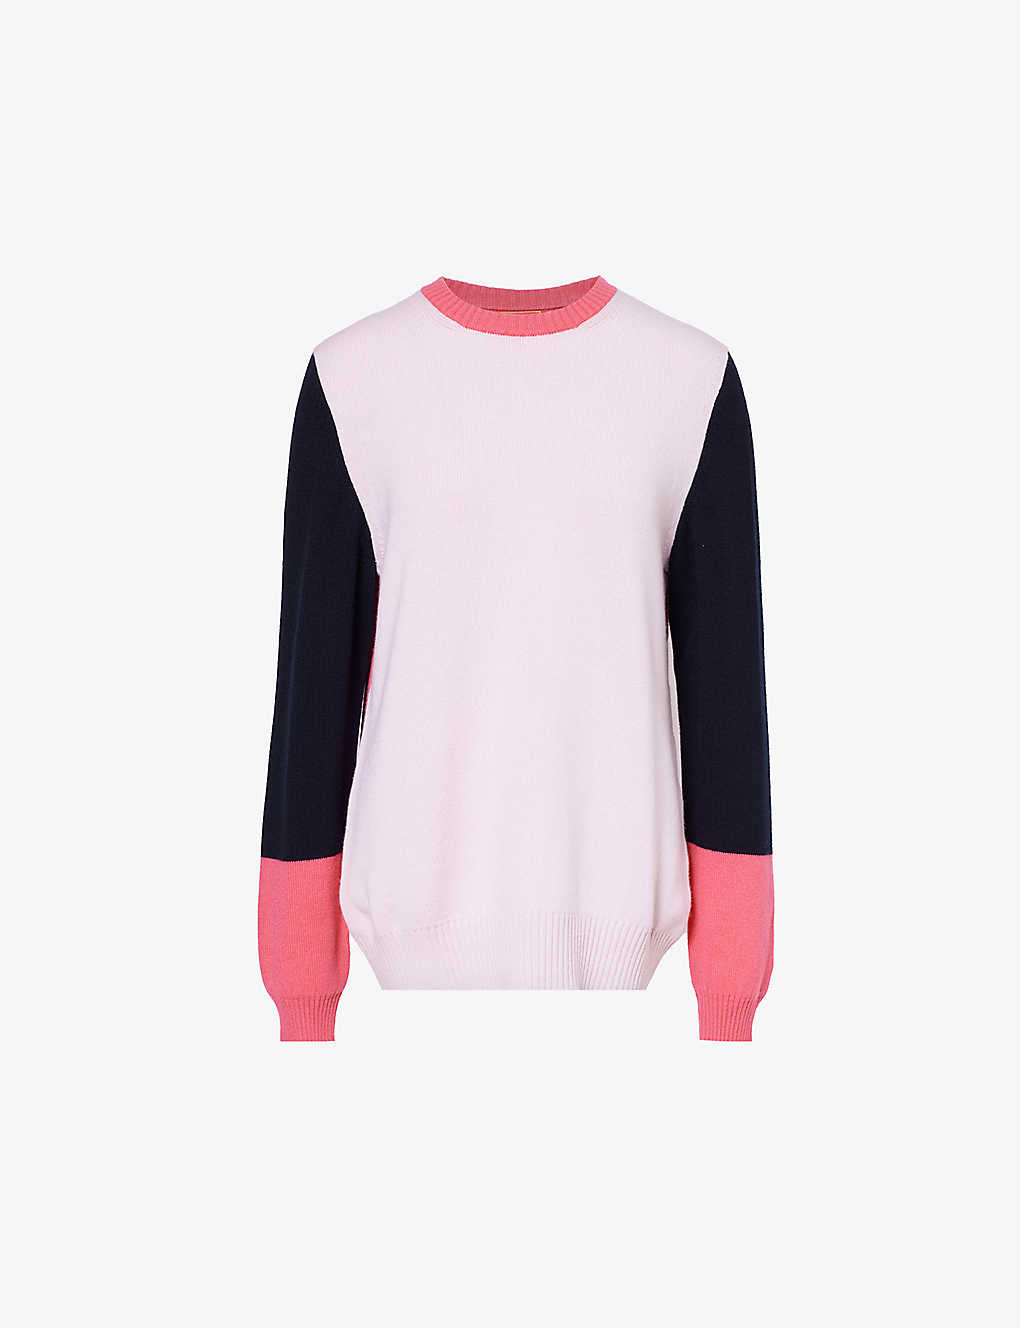 Barrie X Sofia Coppola Colour-blocked Cashmere Jumper In Pink